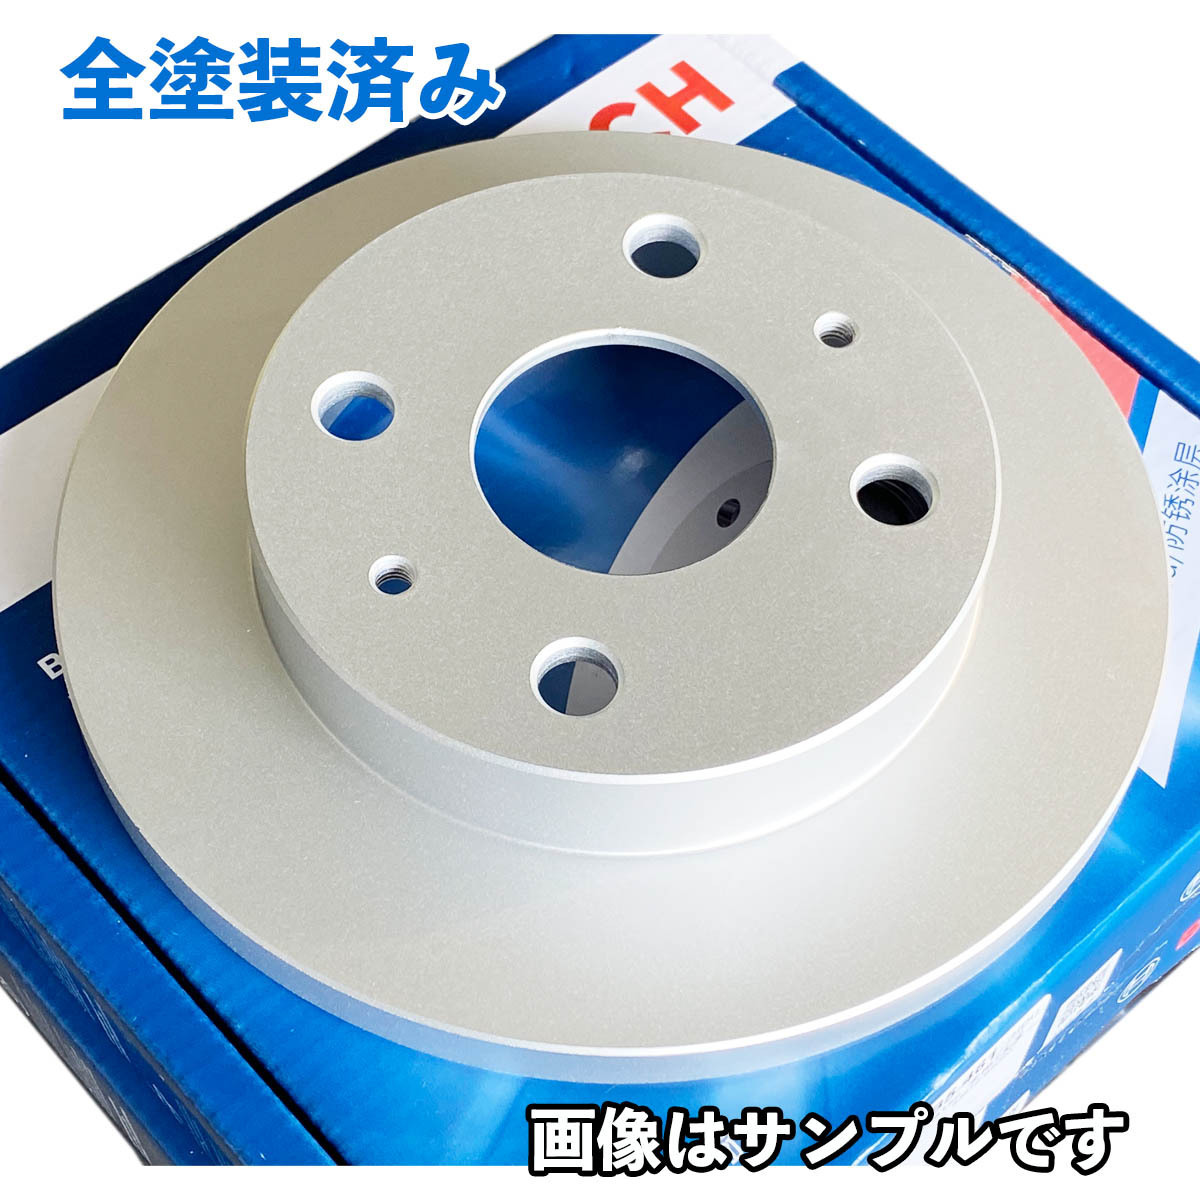  Pajero Mini brake rotor H51A H56A new goods Bosch made beforehand necessary conform verification inquiry painted 